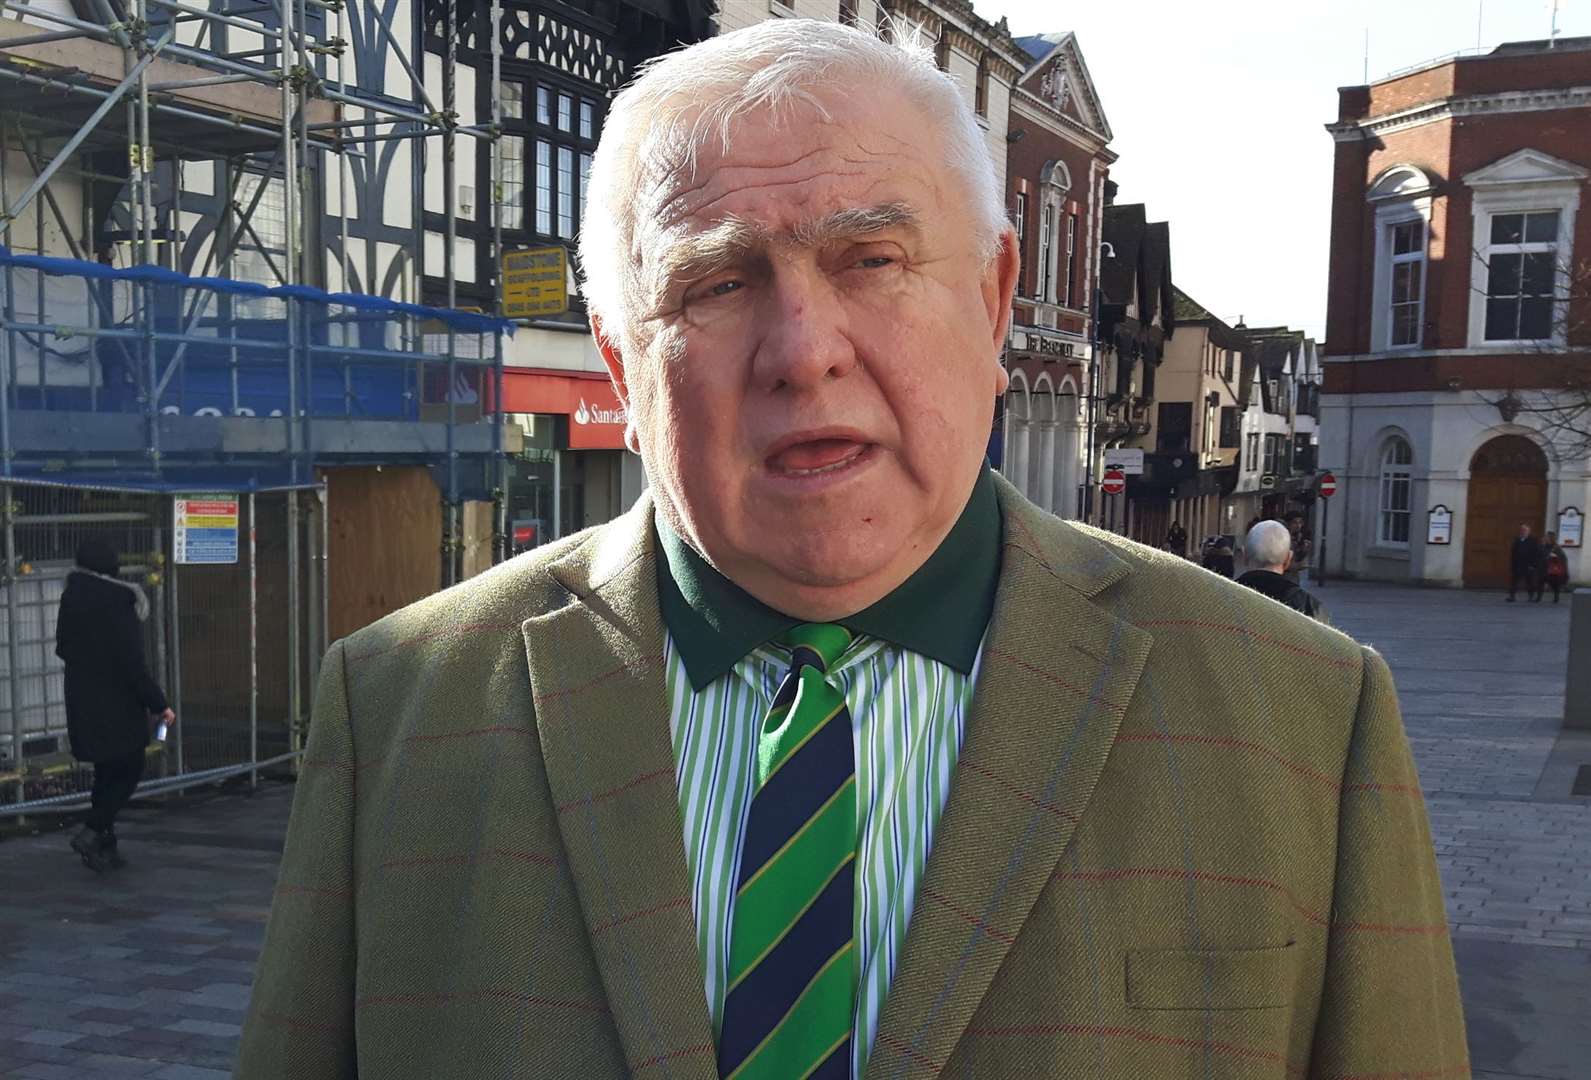 Fergus Wilson has criticised the BBC's Panorama documentary about him